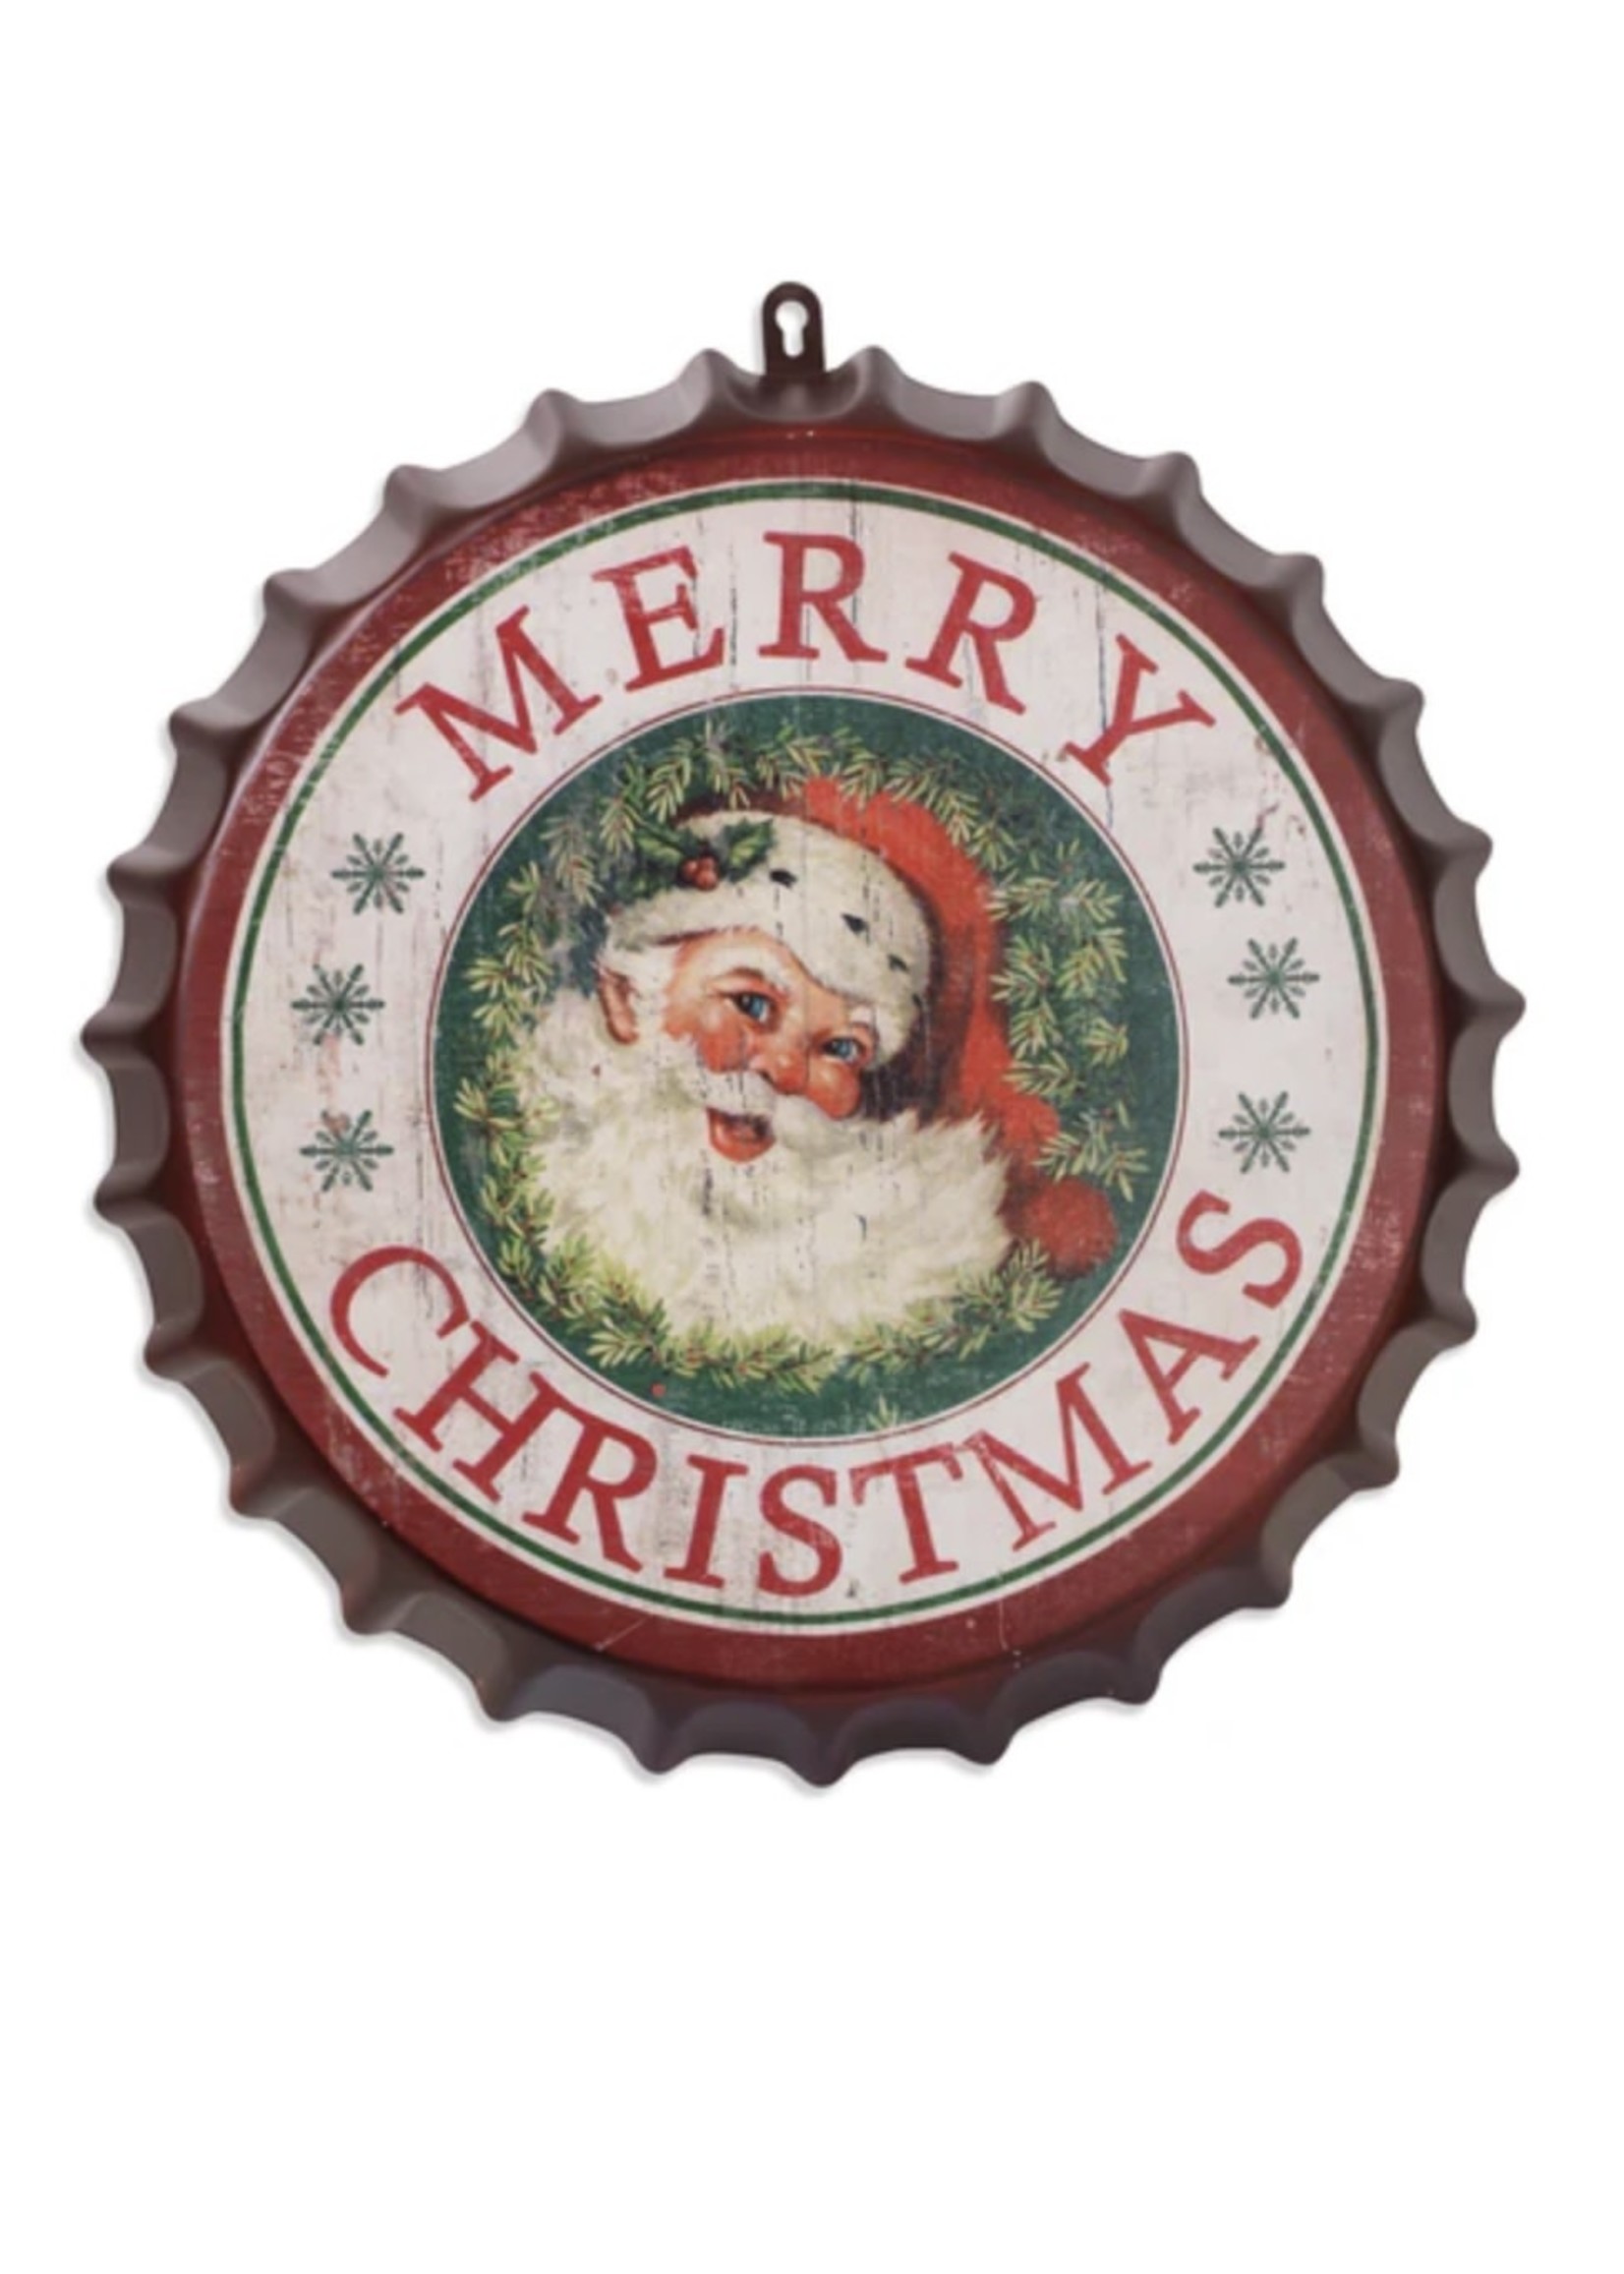 16.5"H Metal "MERRY CHRISTMAS" Bottle Cap Decor - PICK UP ONLY